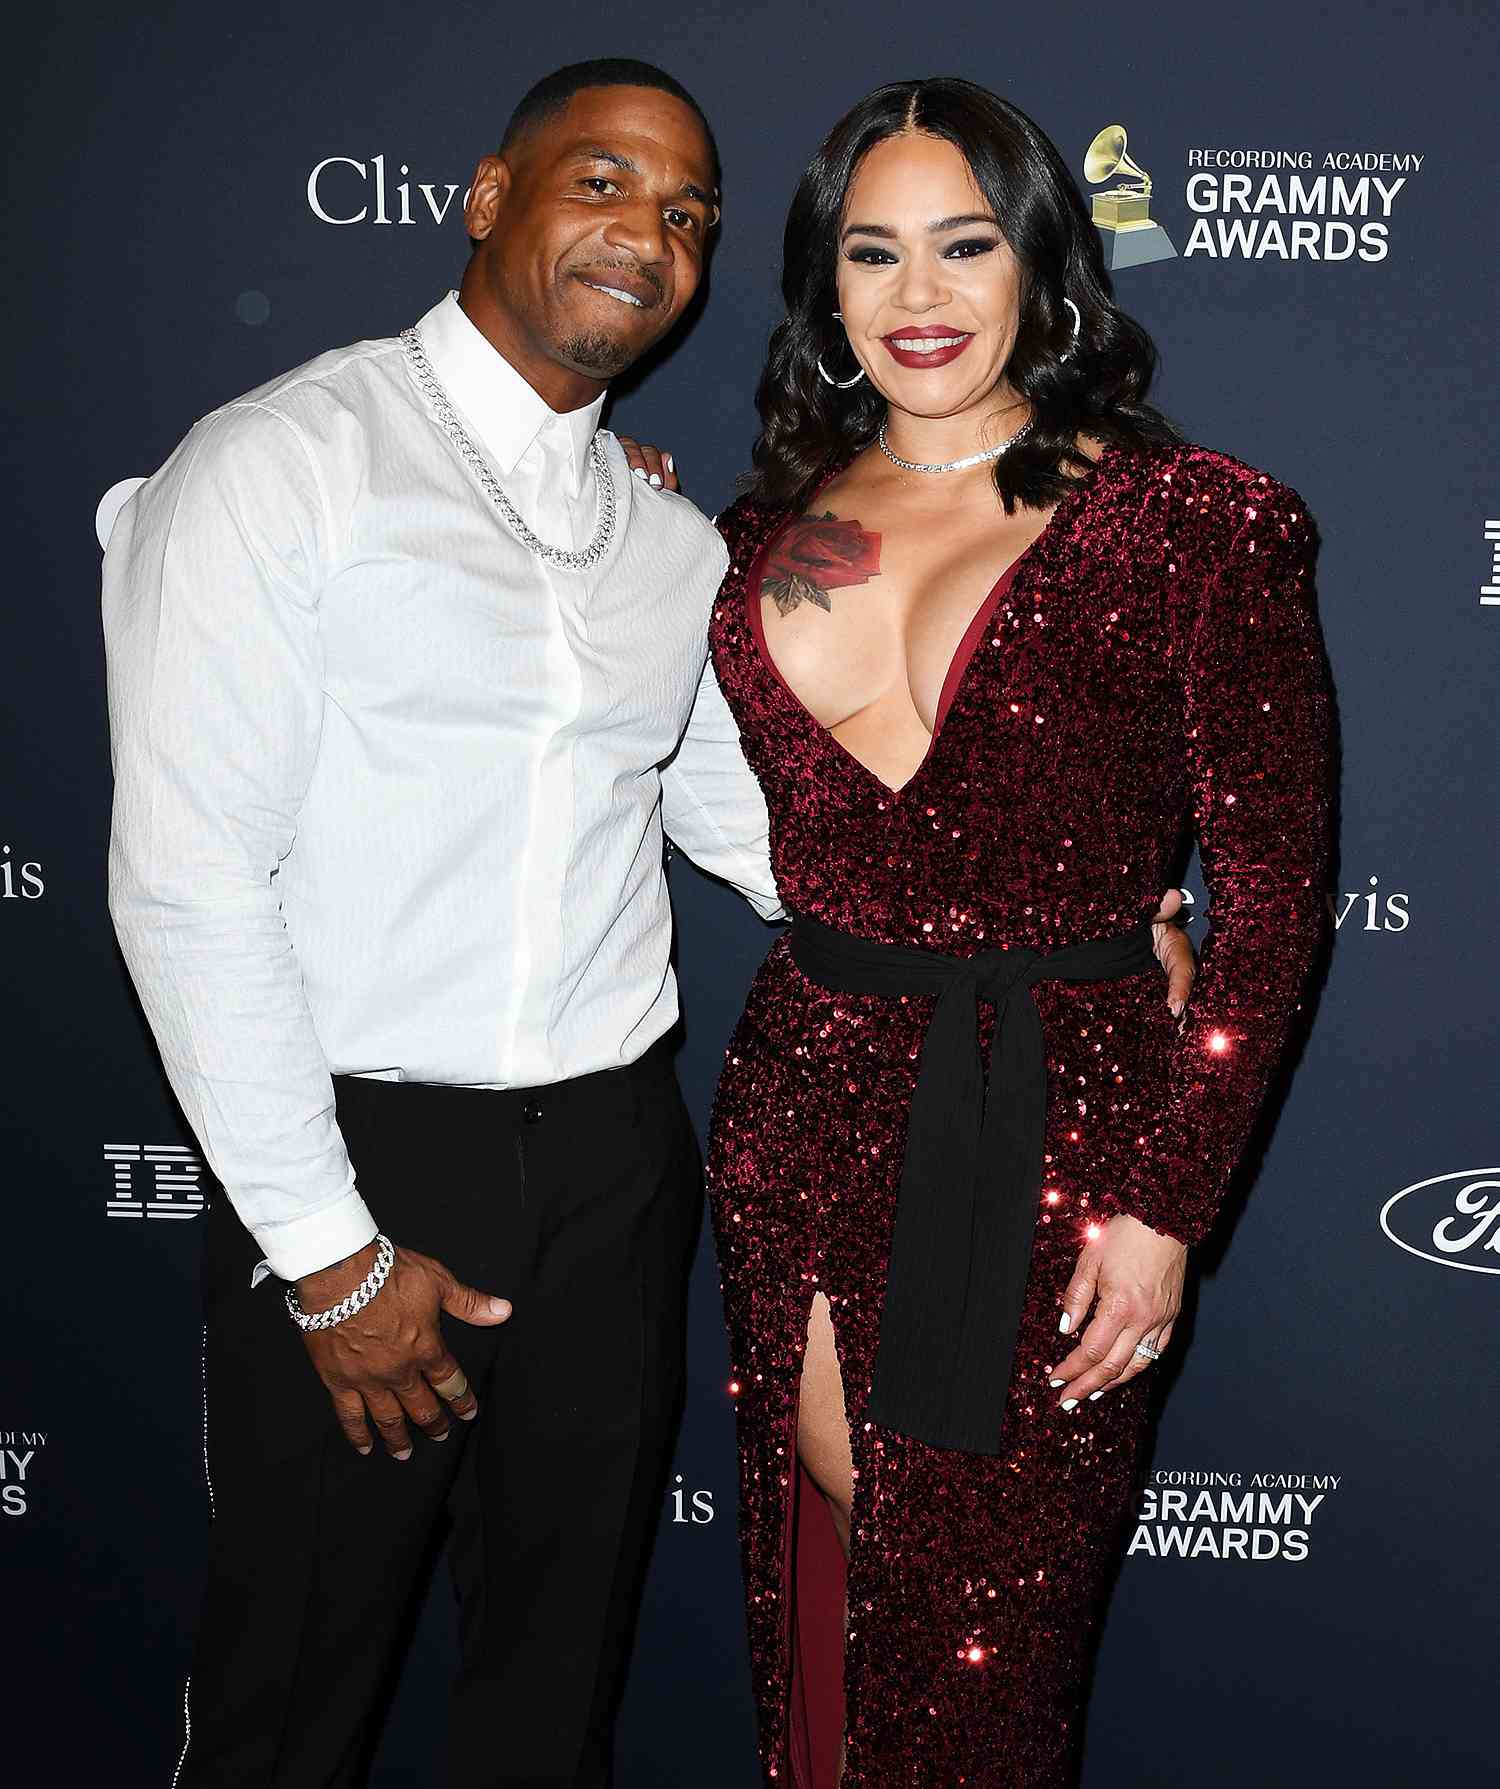 Stevie J and Faith Evans attend the Pre-GRAMMY Gala and GRAMMY Salute to Industry Icons Honoring Sean "Diddy" Combs on January 25, 2020 in Beverly Hills, California.